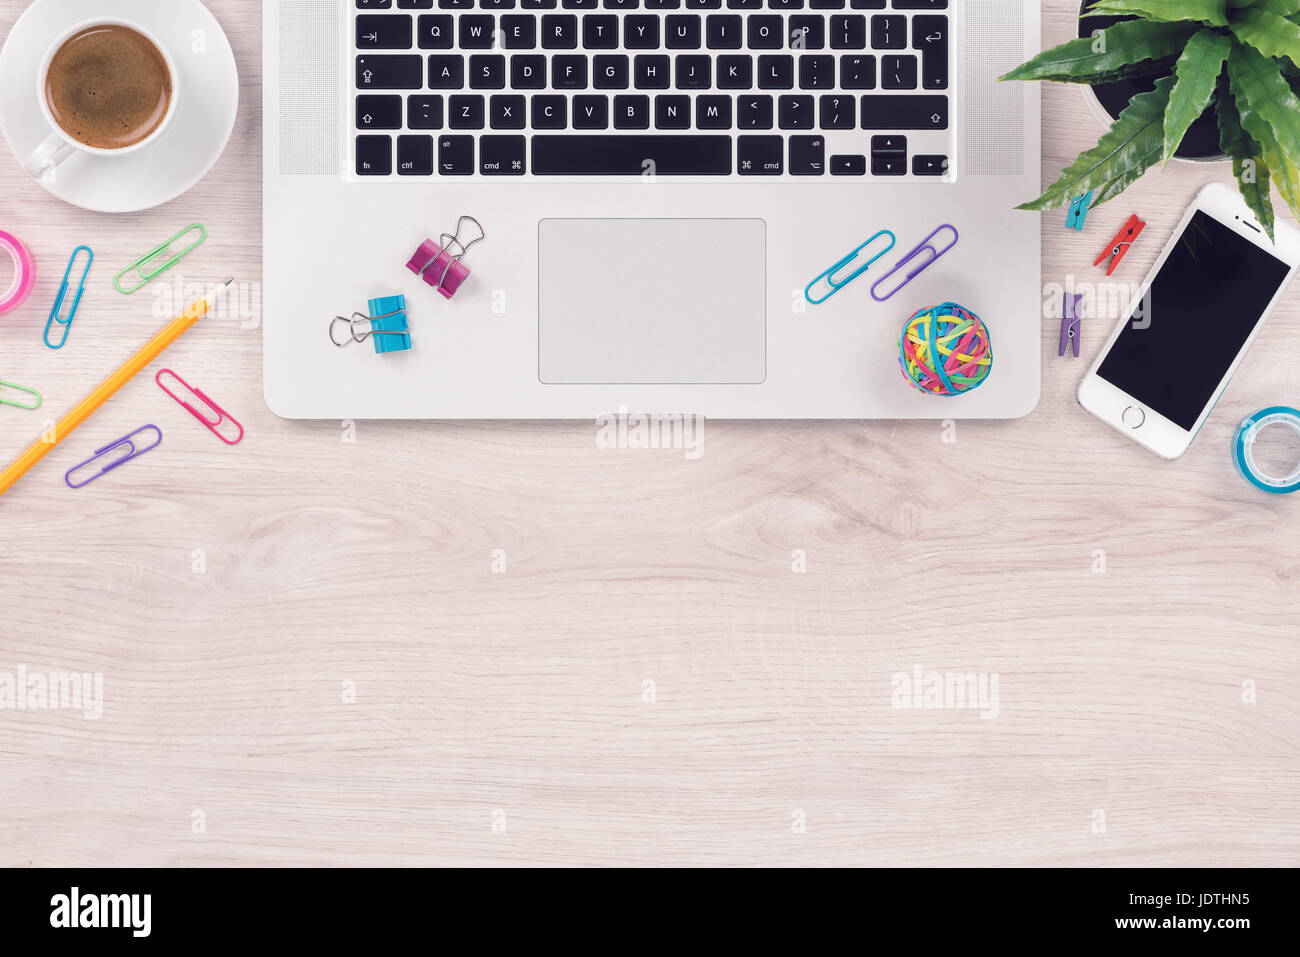 Office desk table workplace with laptop keyboard and smartphone top view flat lay with copy space Stock Photo